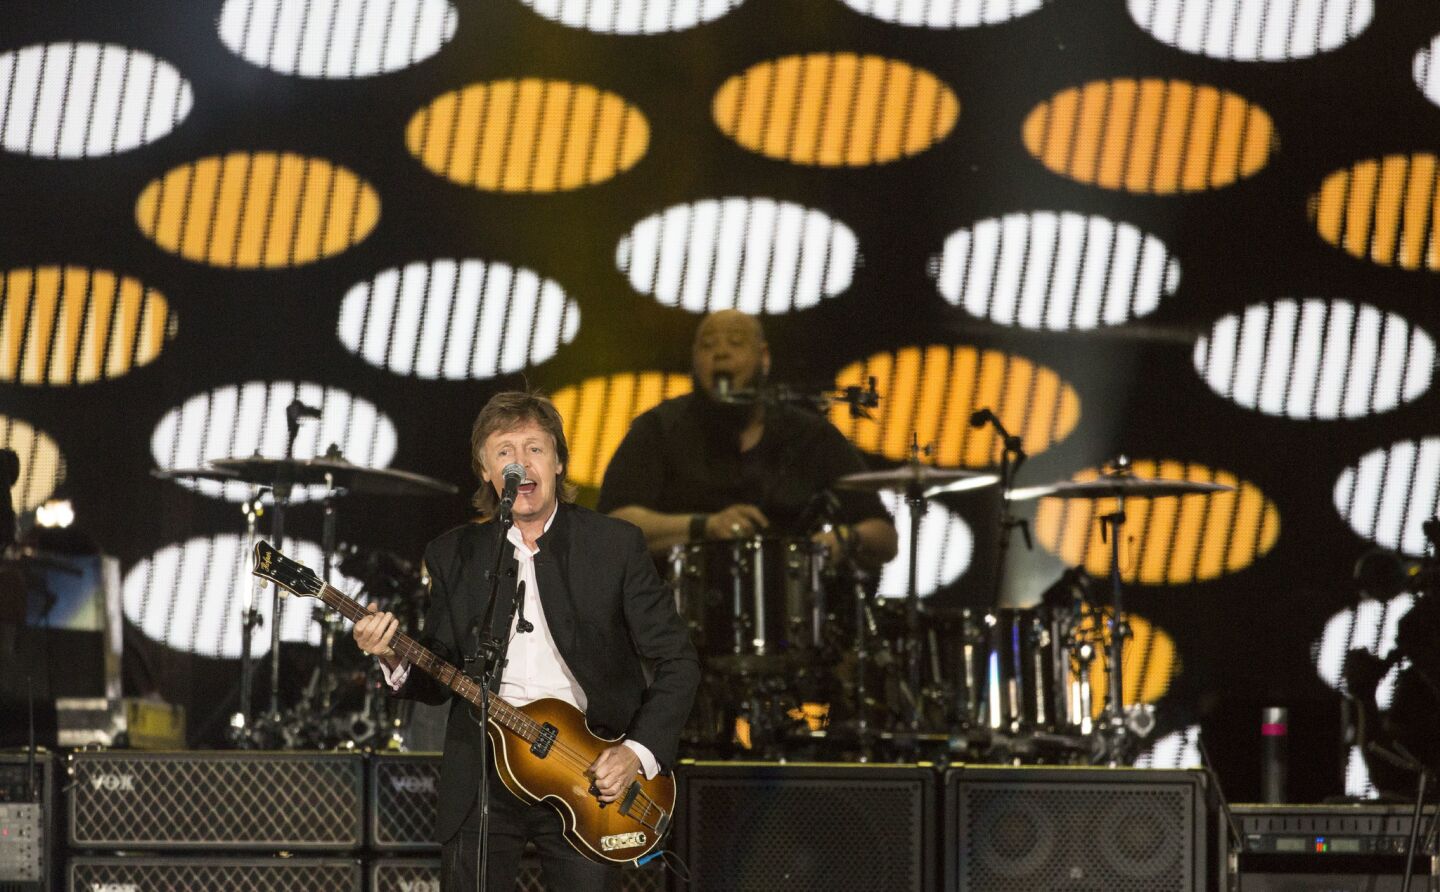 Paul McCartney on stage Saturday night at Desert Trip on the Empire Polo Club grounds in Indio.